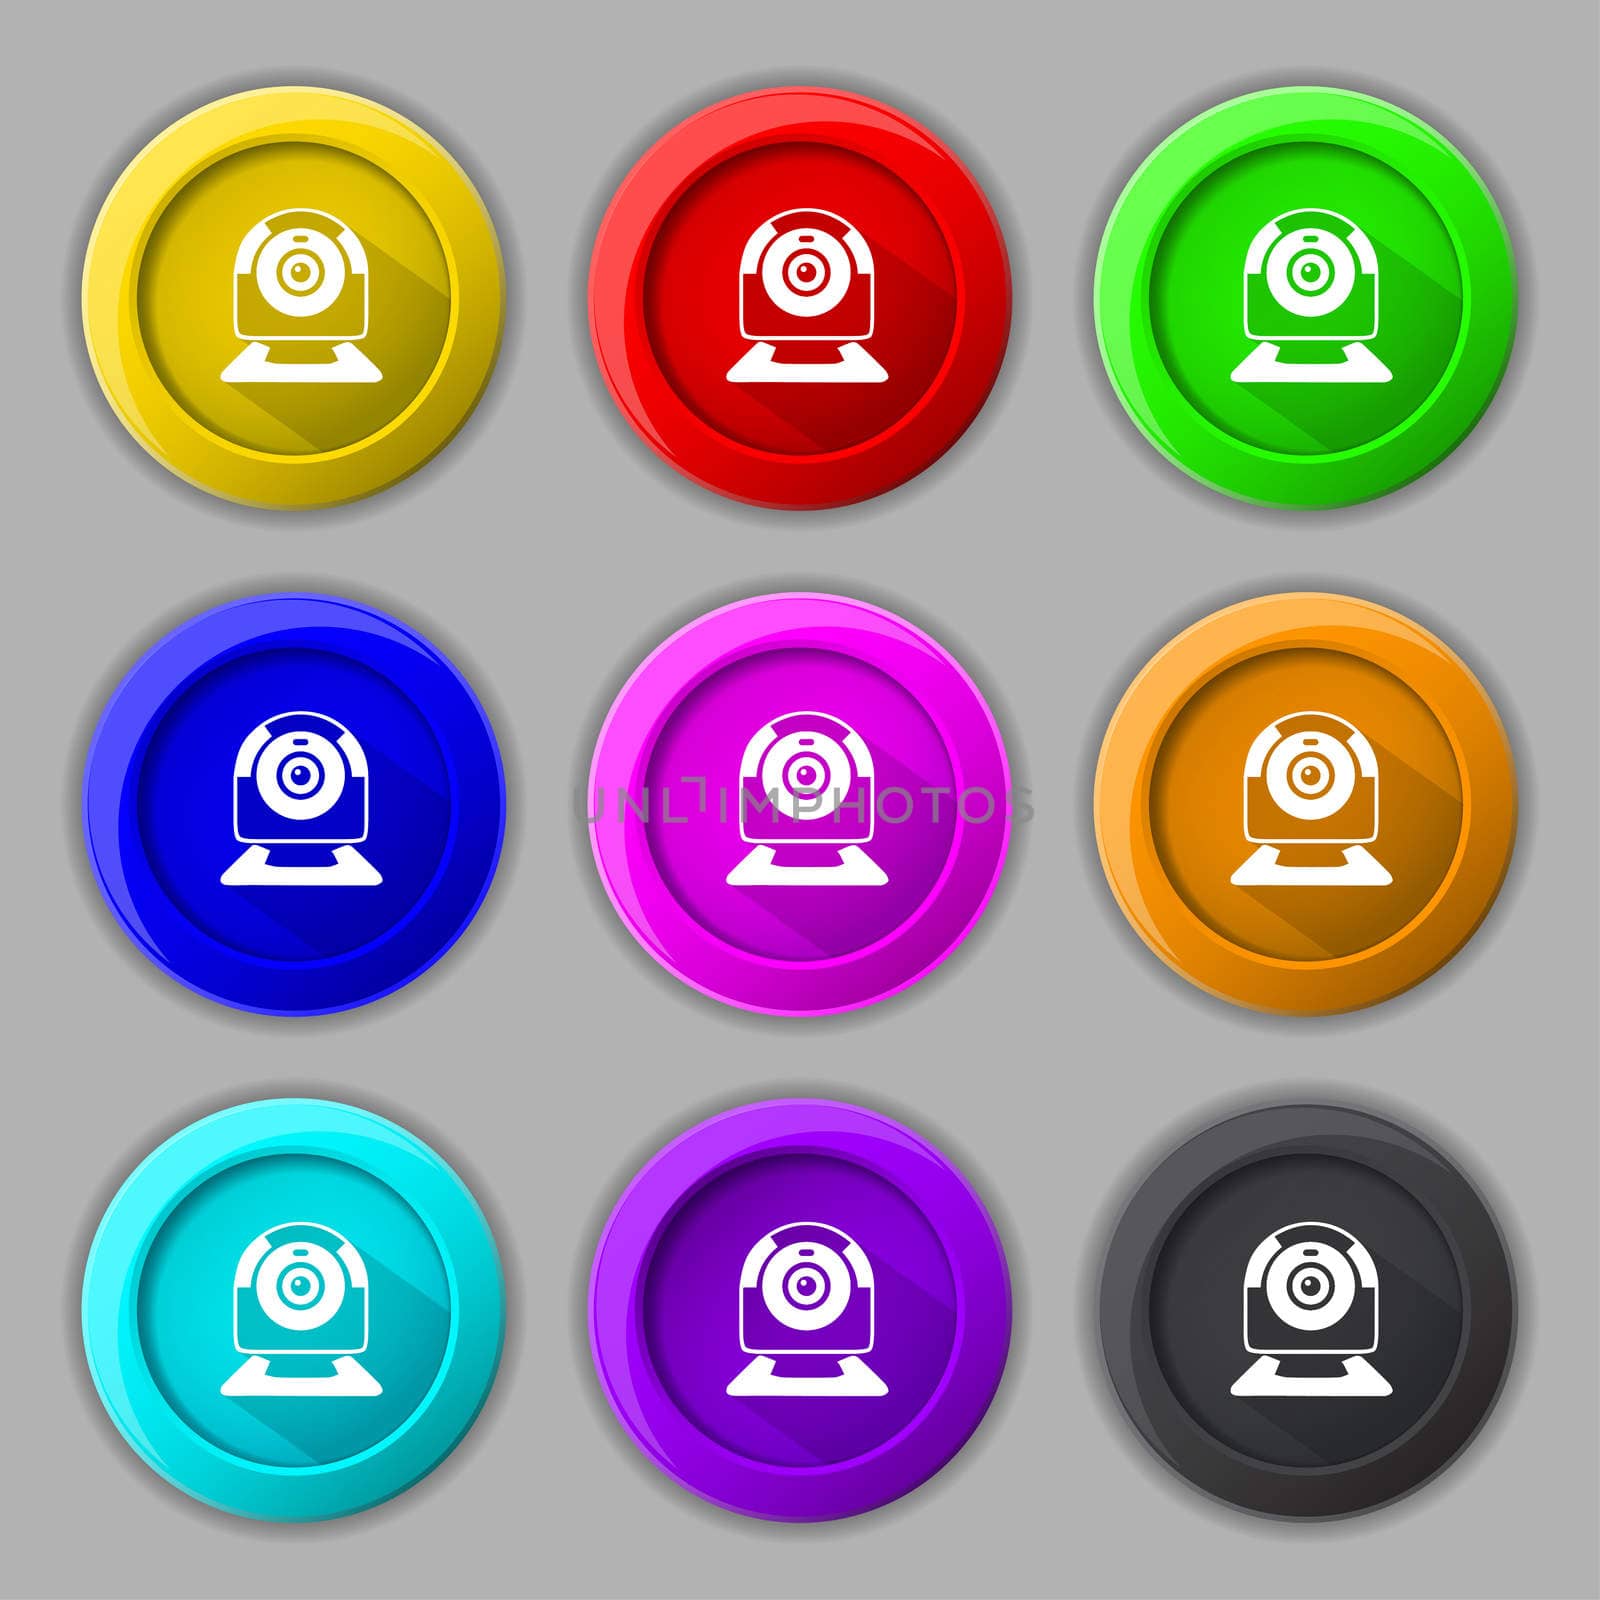 Webcam sign icon. Web video chat symbol. Camera chat. Set of colored buttons. illustration